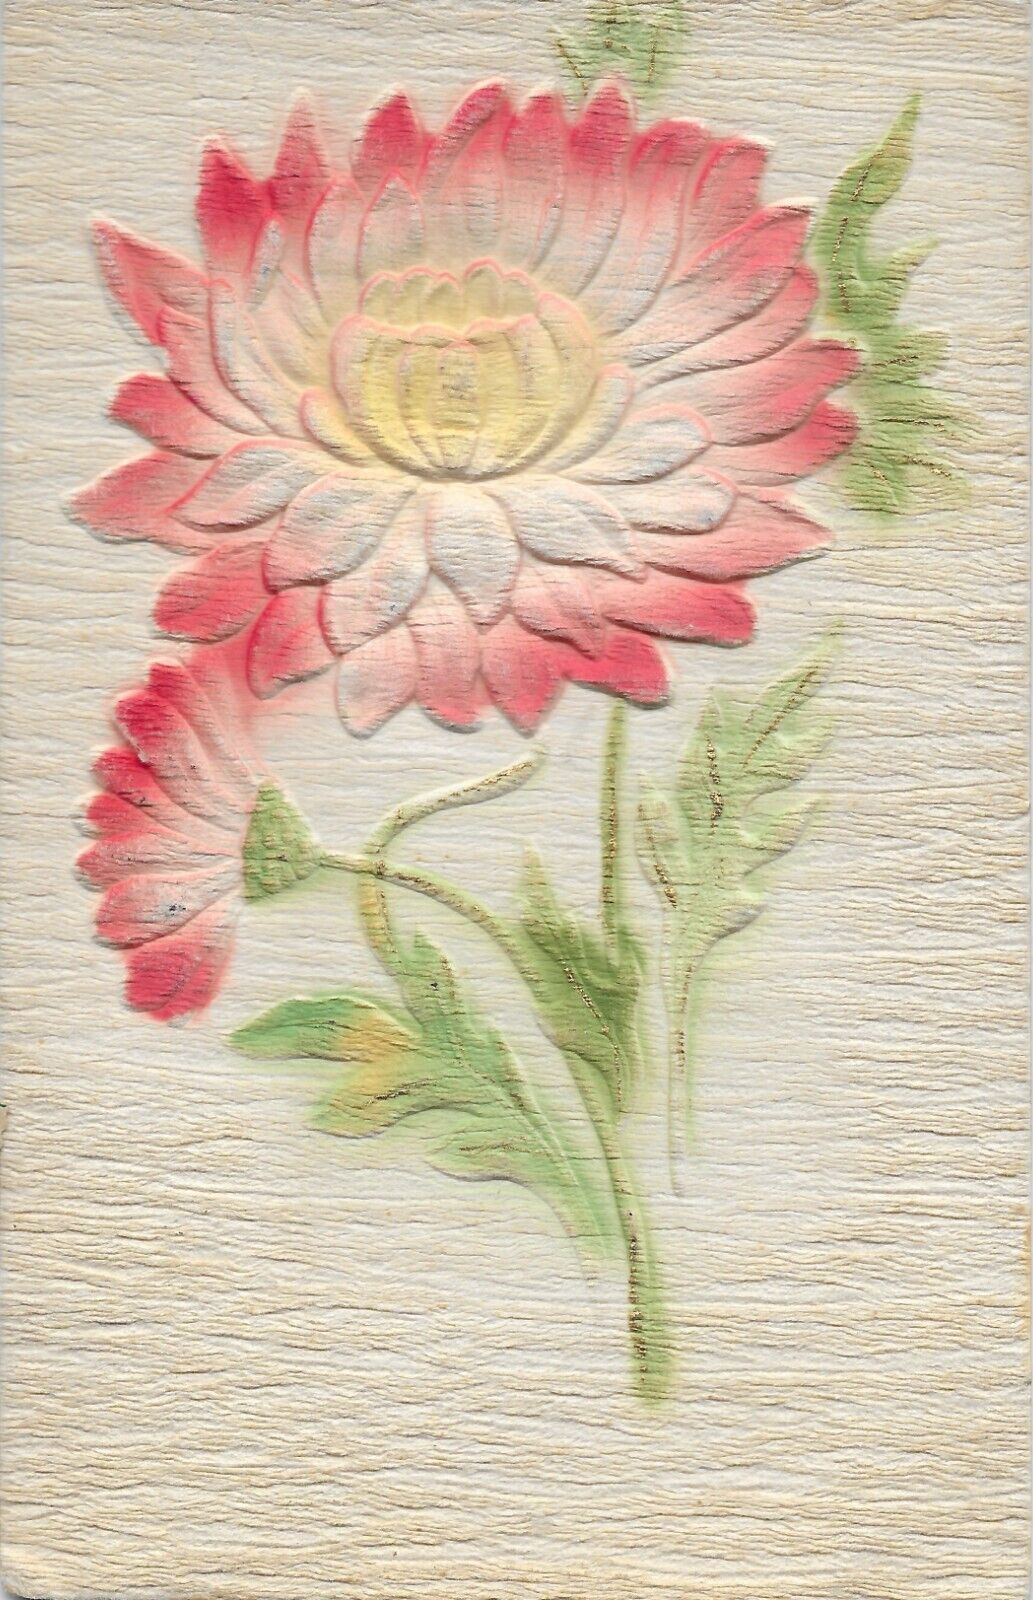 Postcard Raised Felt Flower Airbrushed Plant Made in Germany Novelty Best Wishes